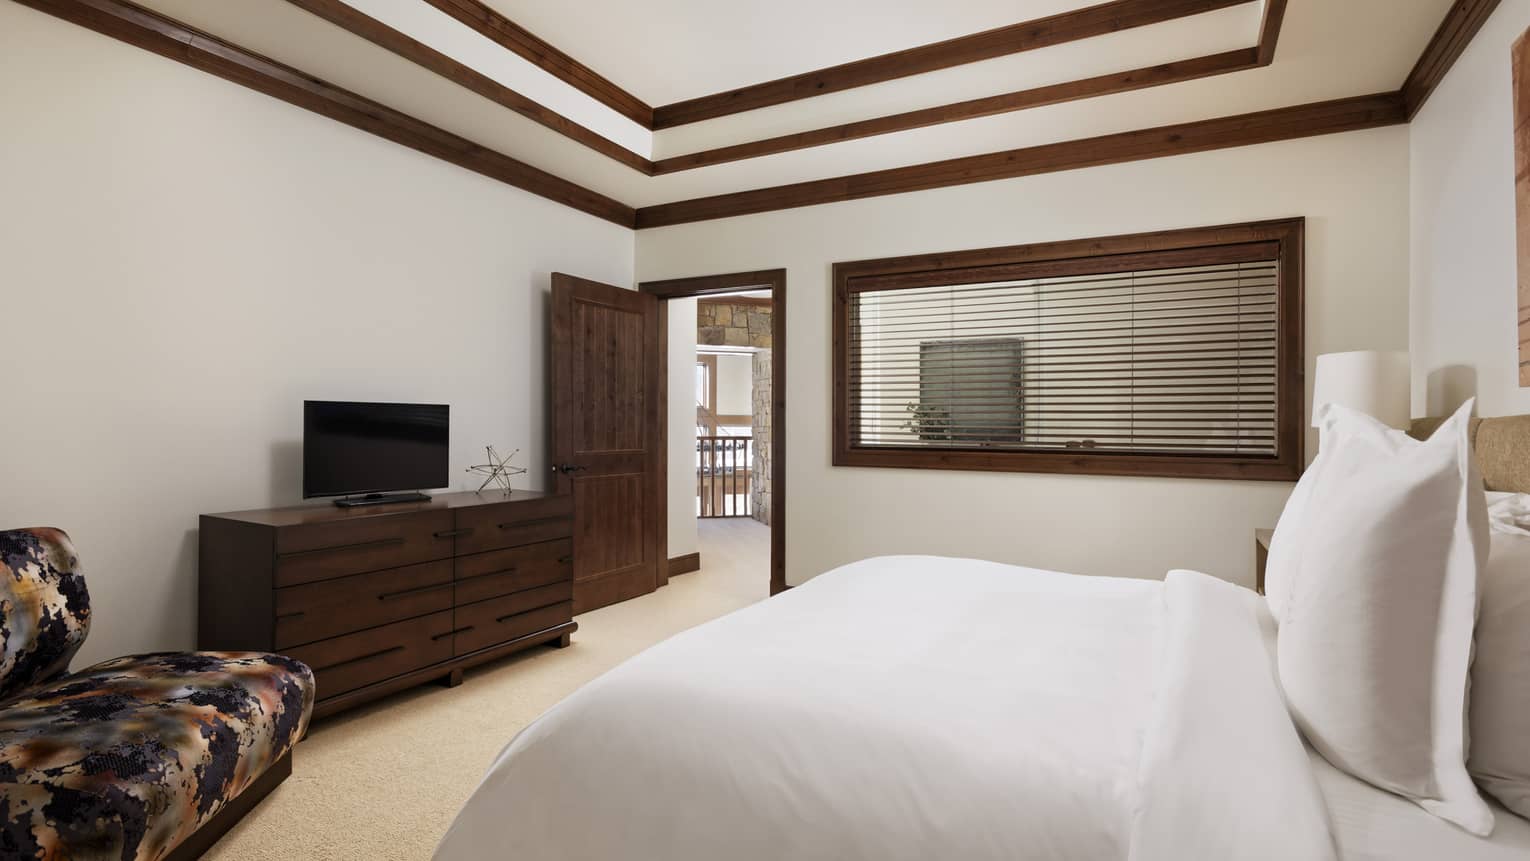 Bedroom with single bed, wooden dresser and TV, vaulted ceiling with dark wood crown molding